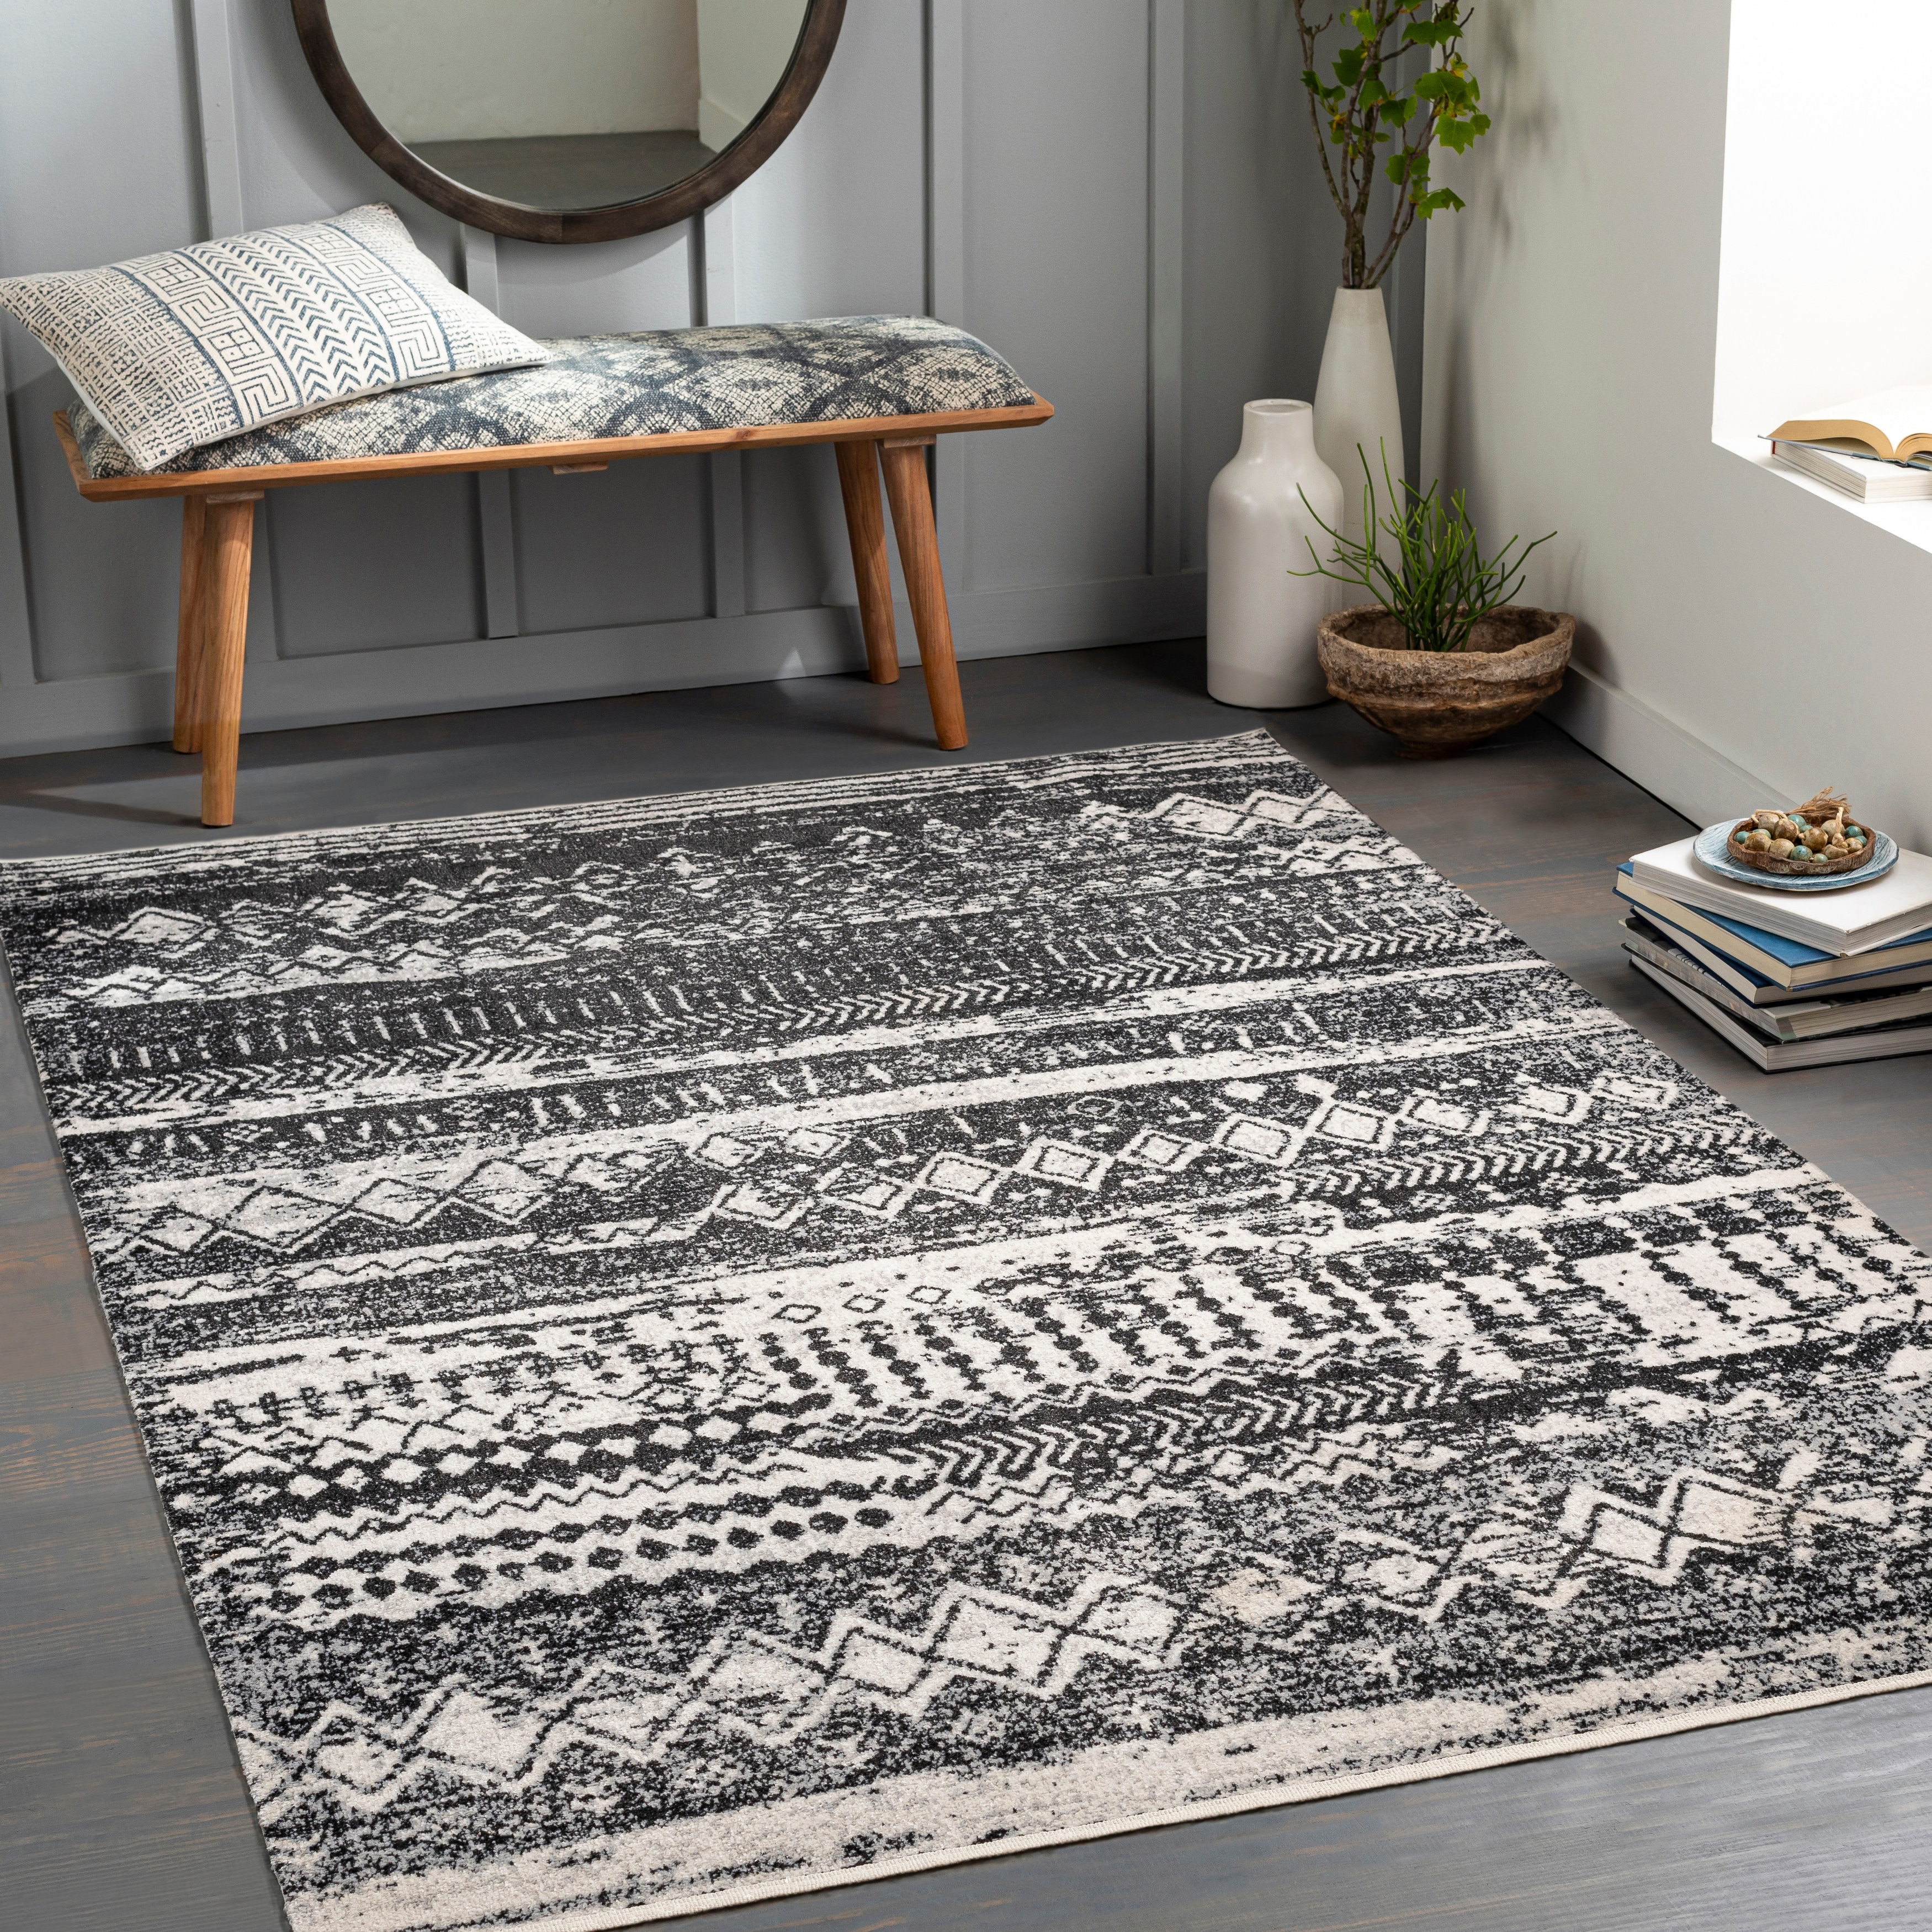 https://ak1.ostkcdn.com/images/products/is/images/direct/0acfb98613f3cf7d1fd4bb2c5eff1c544f0f659b/Trina-Bohemian-Machine-Washable-Area-Rug.jpg